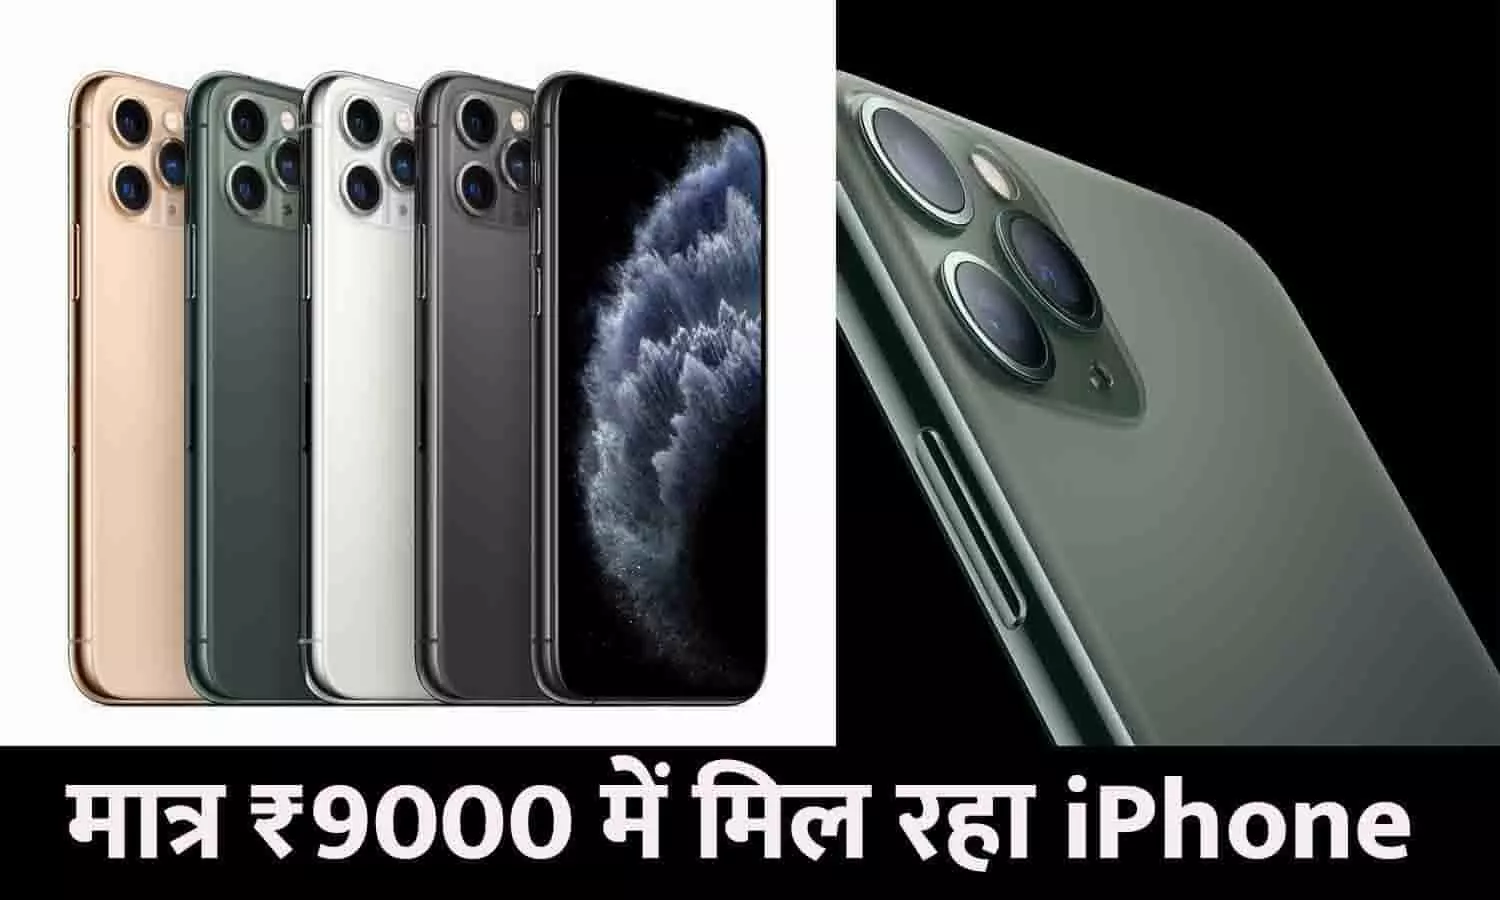 iPhone Under Rs 9000